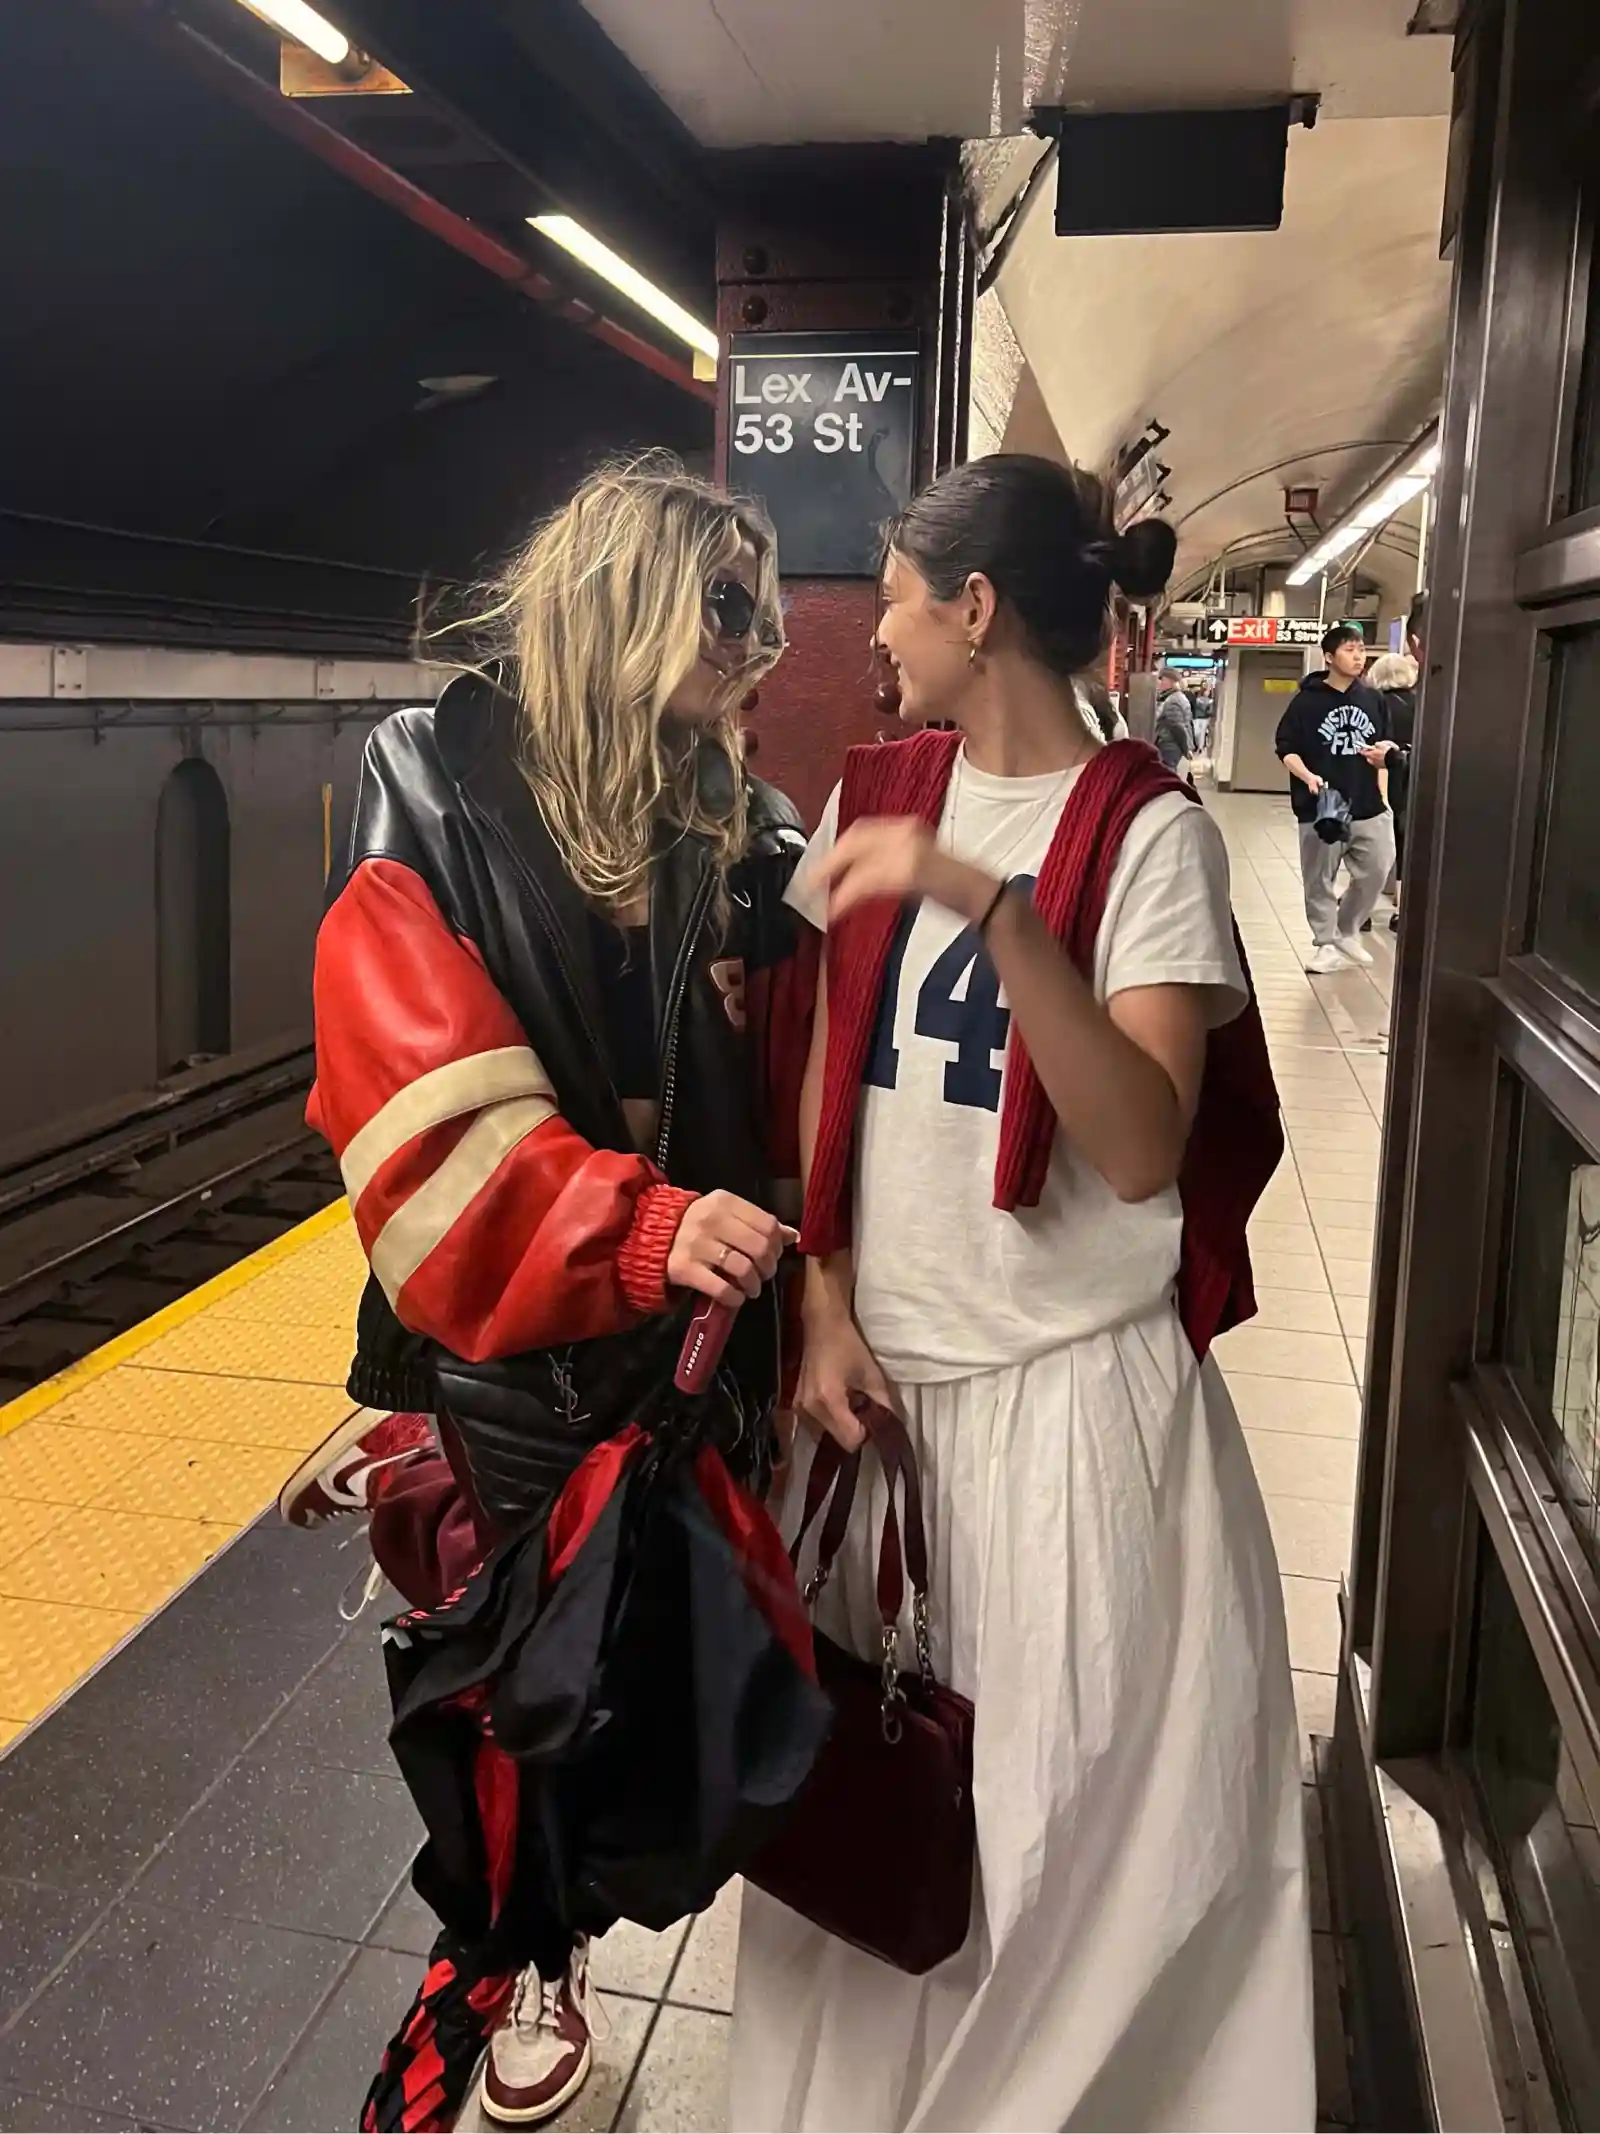 Find this outfit– Two stylish girls waiting for the subway